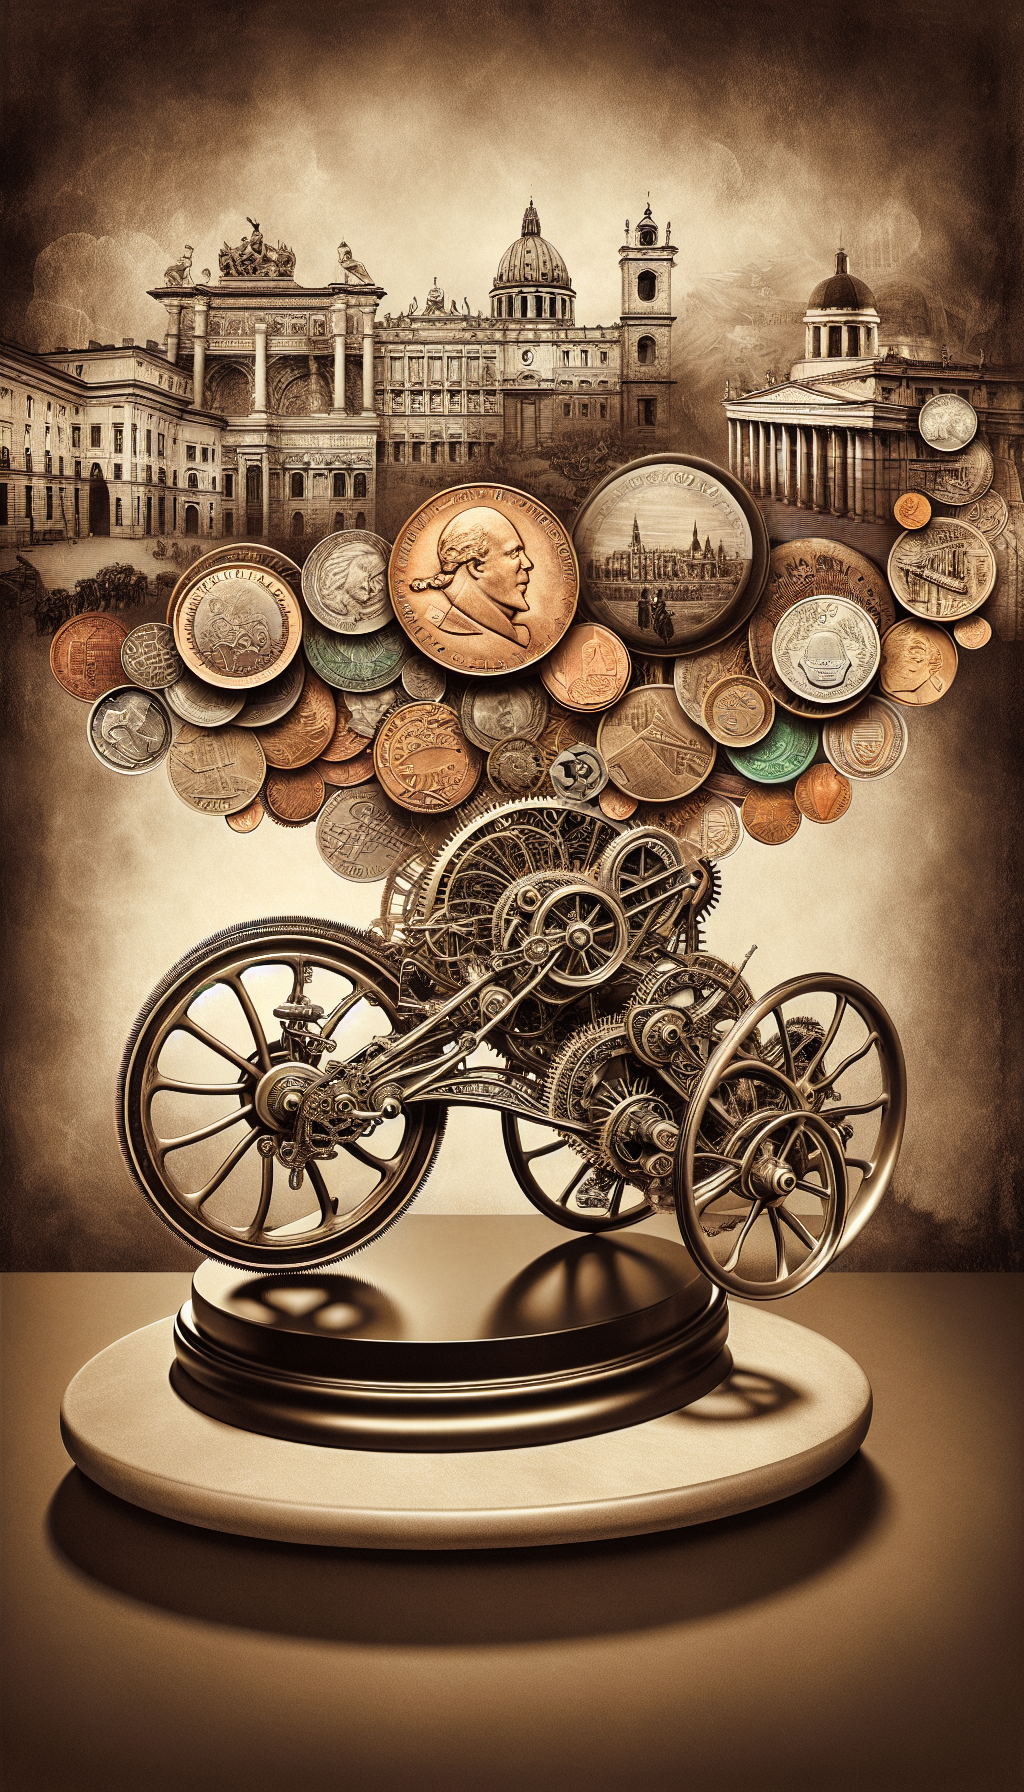 An illustration of a timeless, ornate tricycle perched on a pedestal, with its wheels transitioning into intricate gears that mesh with coins and banknotes, symbolizing the increasing value of antique models. The backdrop is a sepia-toned montage of historical landmarks, suggesting a journey through time, highlighting the tricycle’s heritage and desirability among collectors.